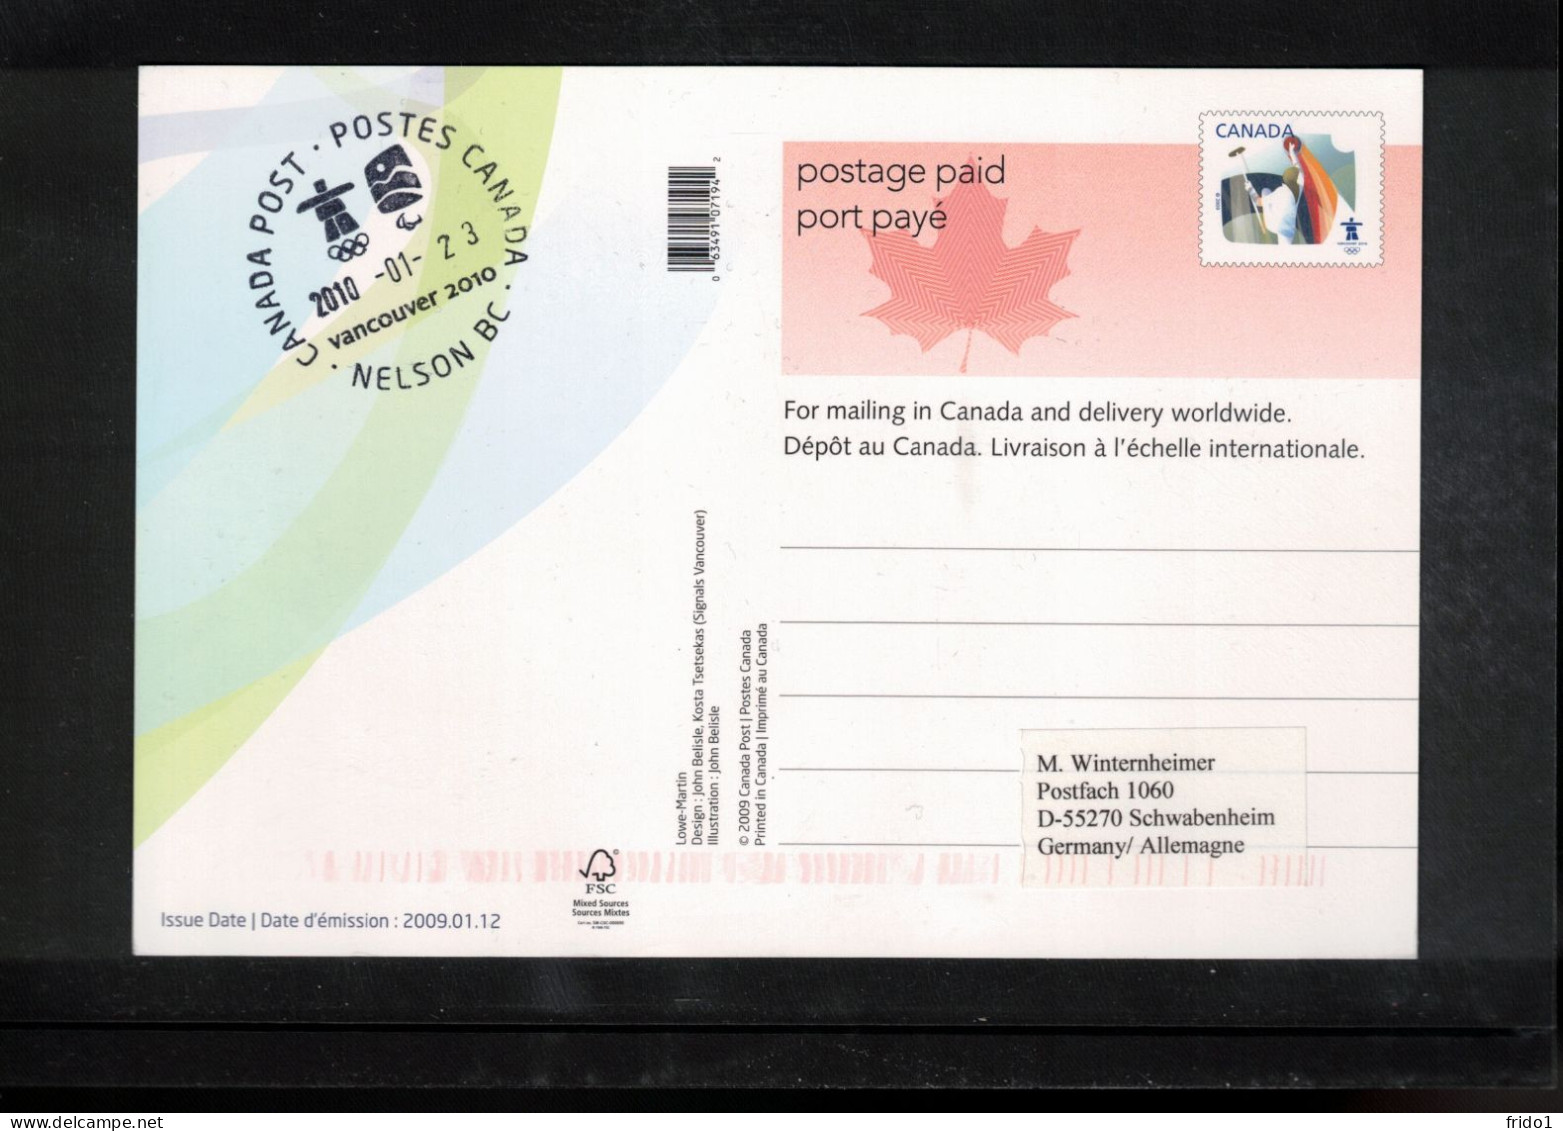 Canada 2010 Olympic Games Vancouver - NELSON BC Postmark Interesting Postcard - Winter 2010: Vancouver